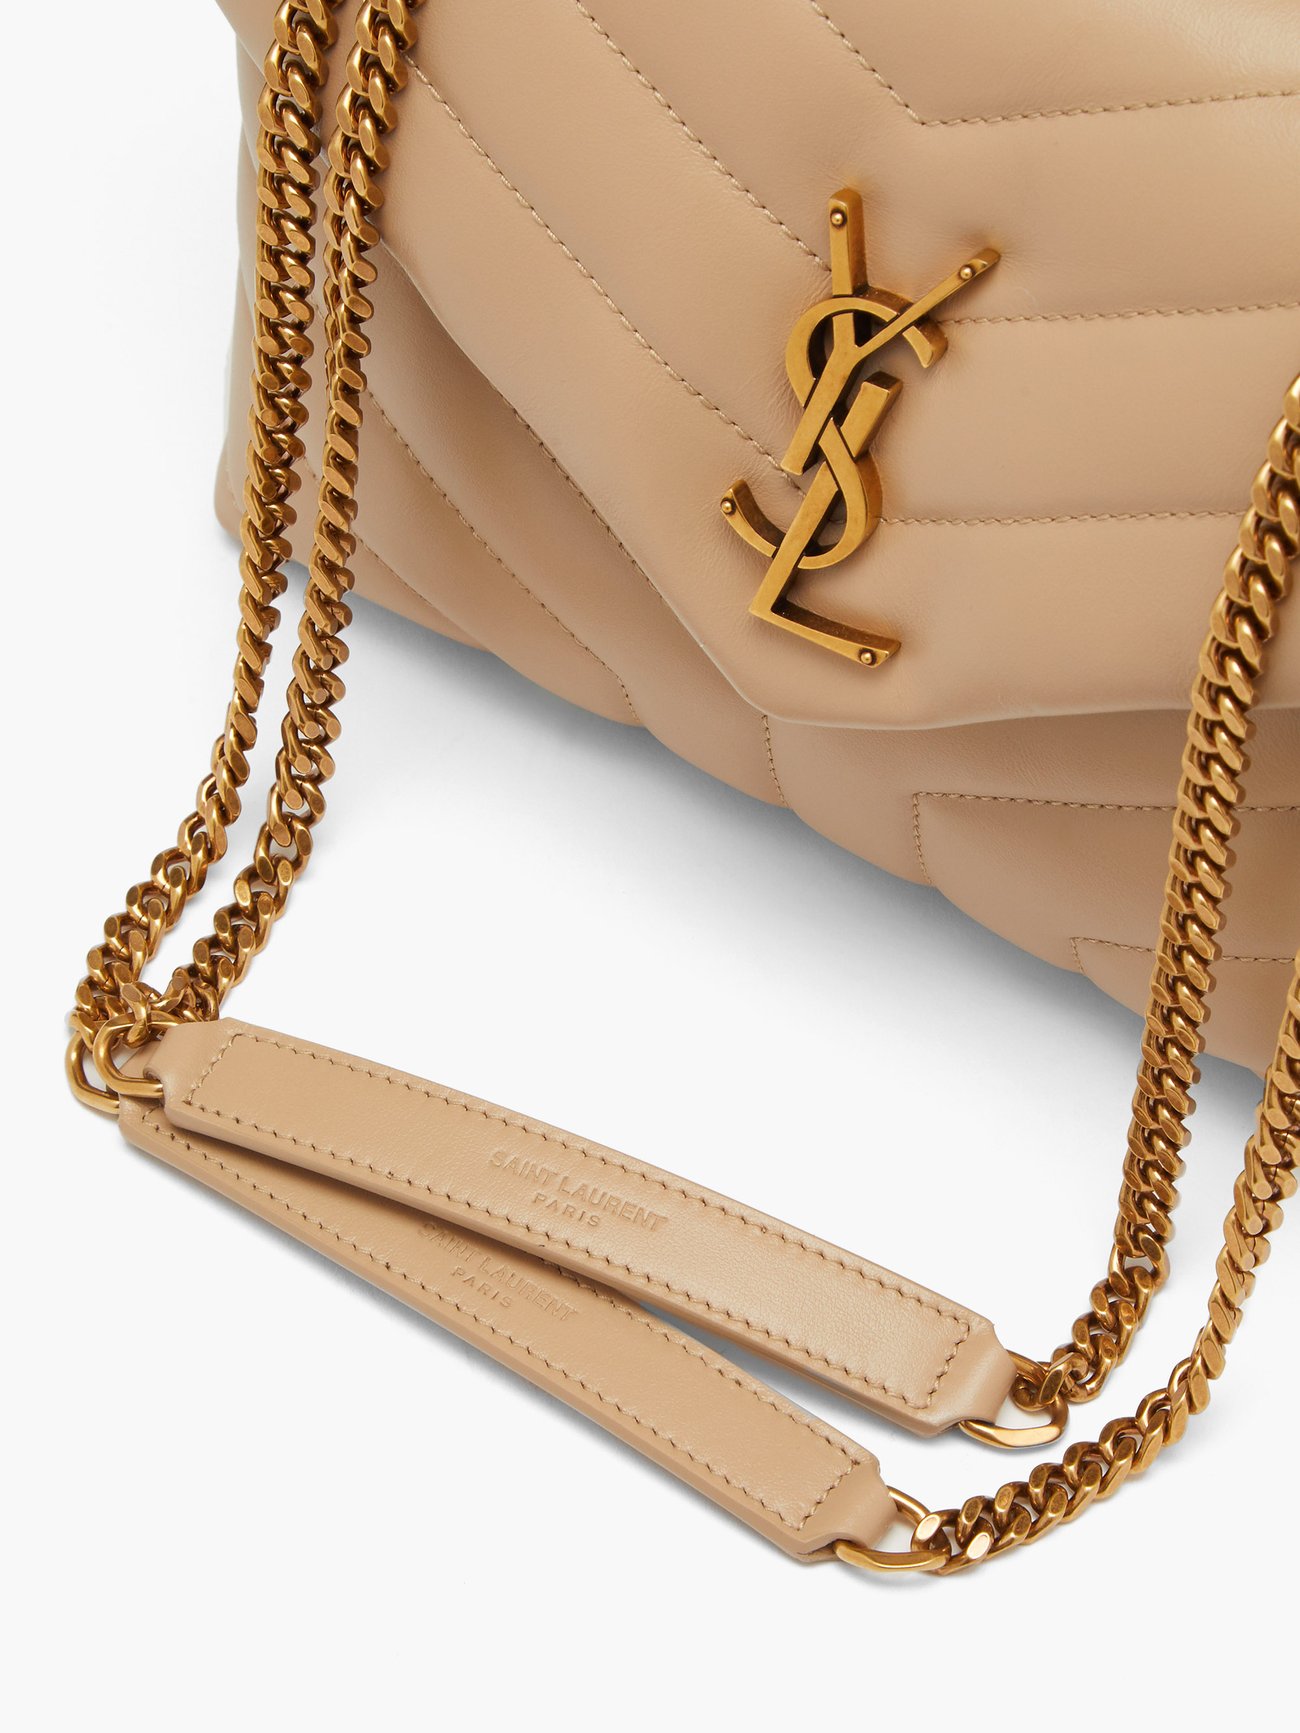 Saint Laurent Women's Loulou Cream Quilted & Padded Leather Small Bag | by Mitchell Stores